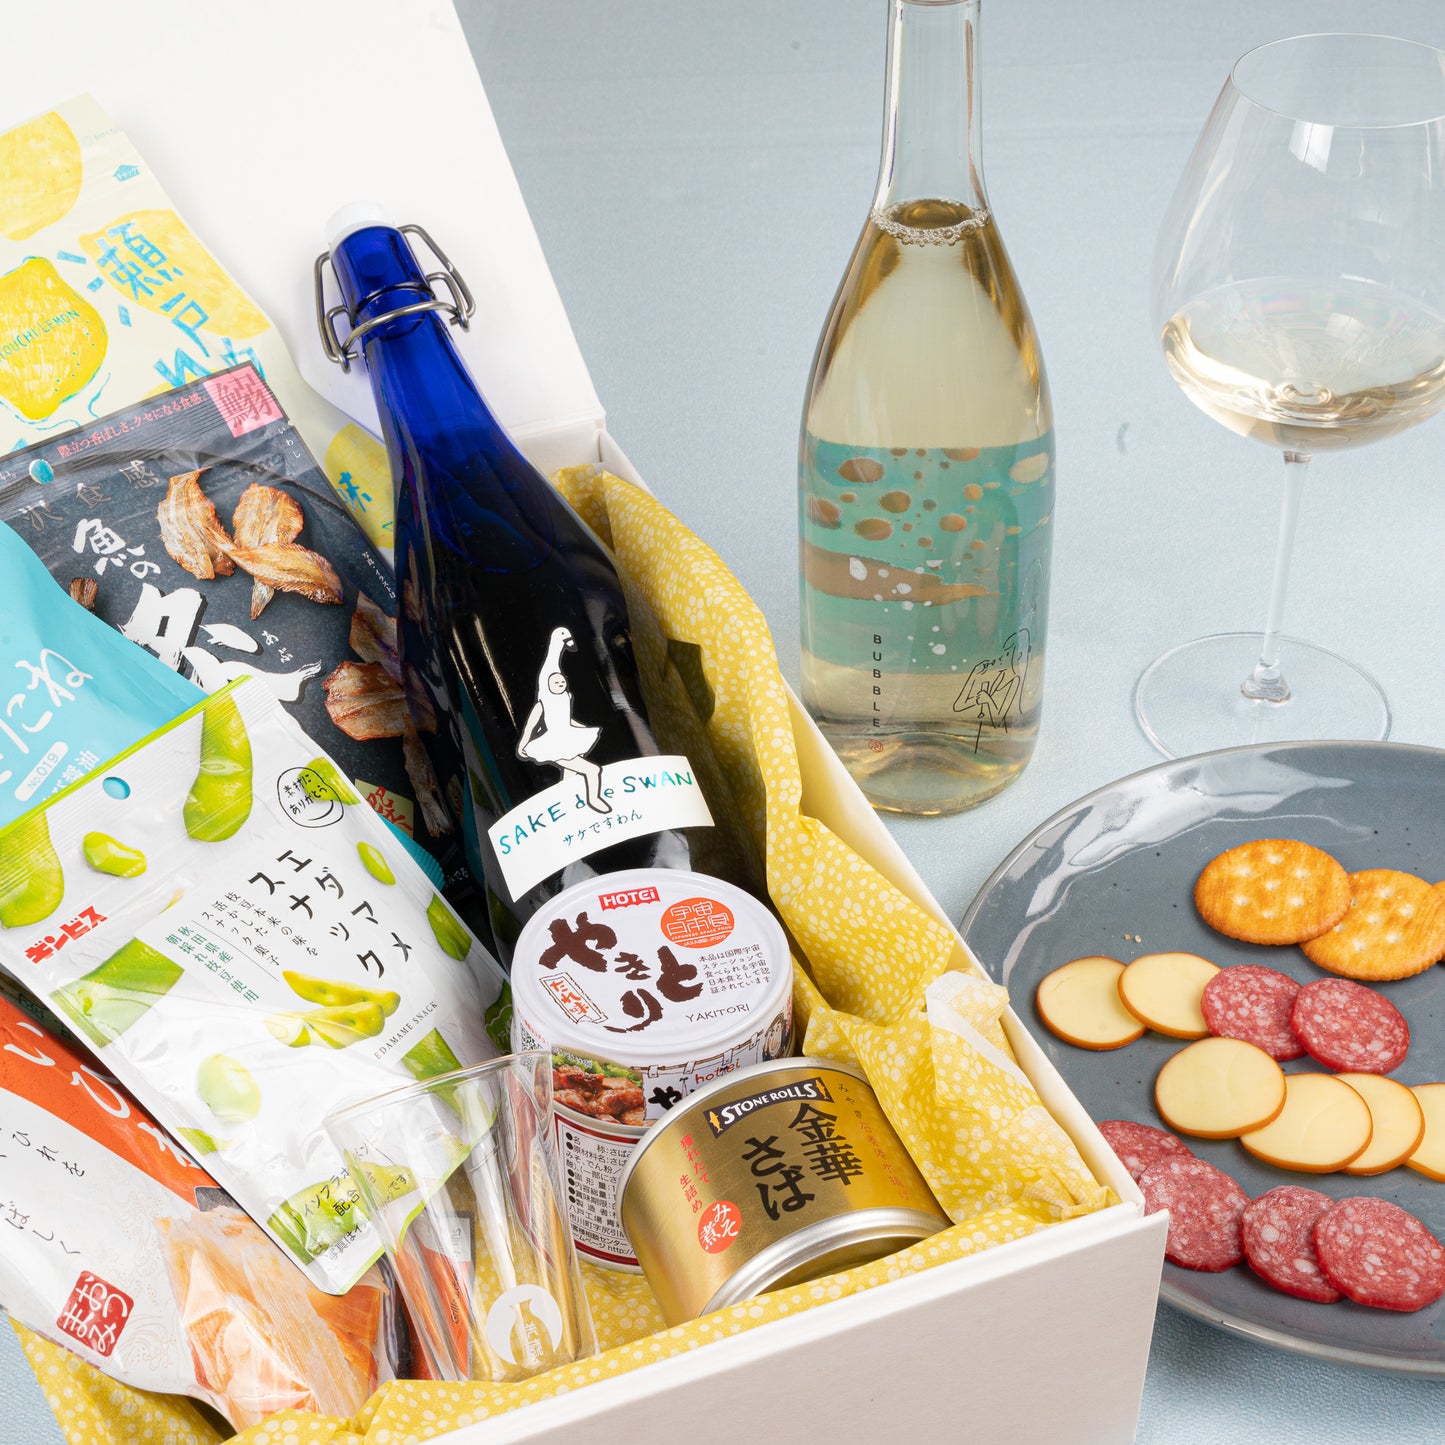 Sweet-fruity sake and Traditional Japanese snack set